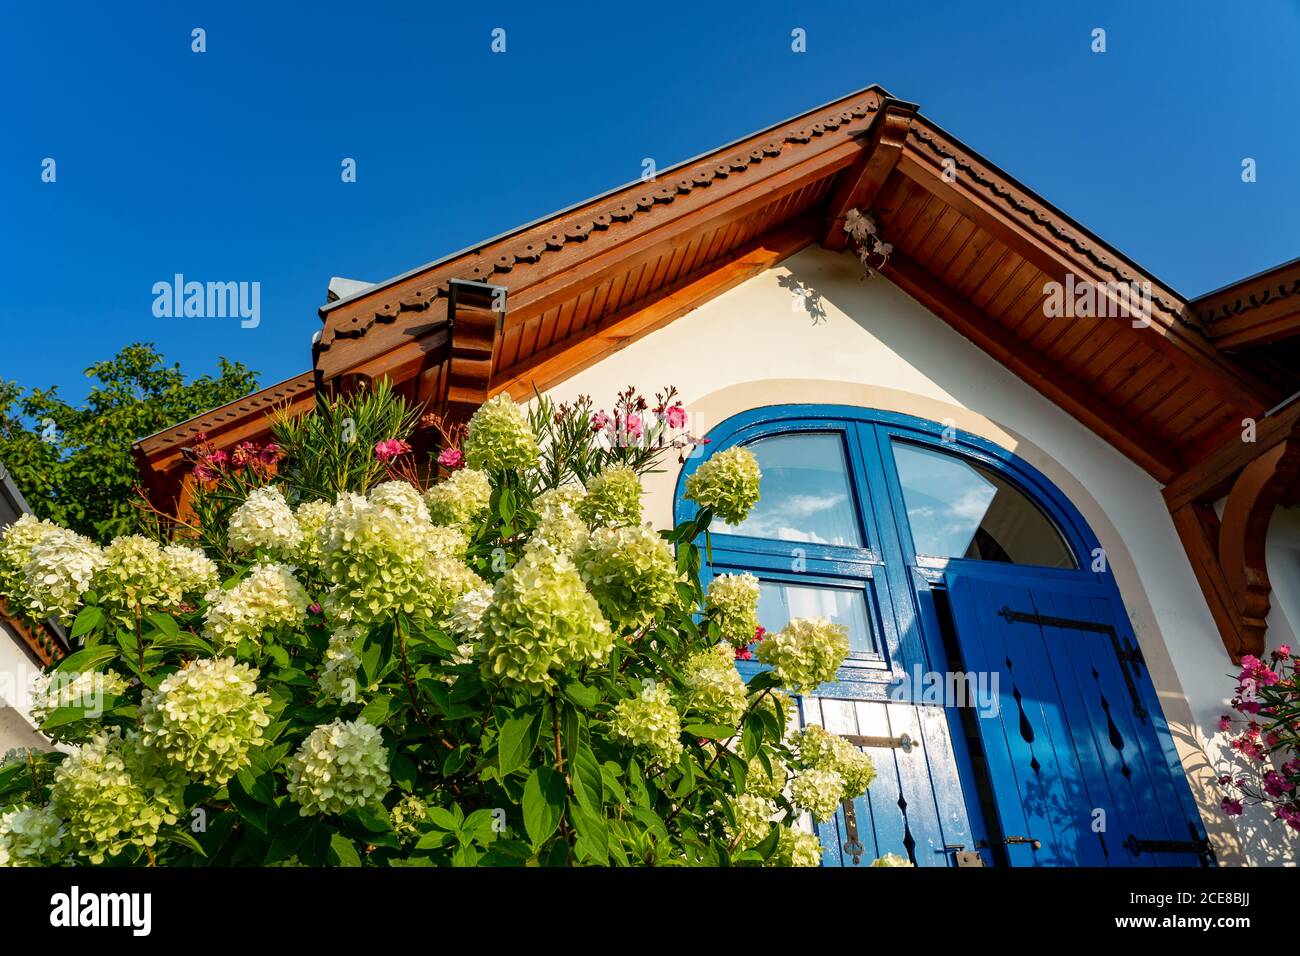 Colorful house entrance in Pecs Hungary with many flowers Stock Photo